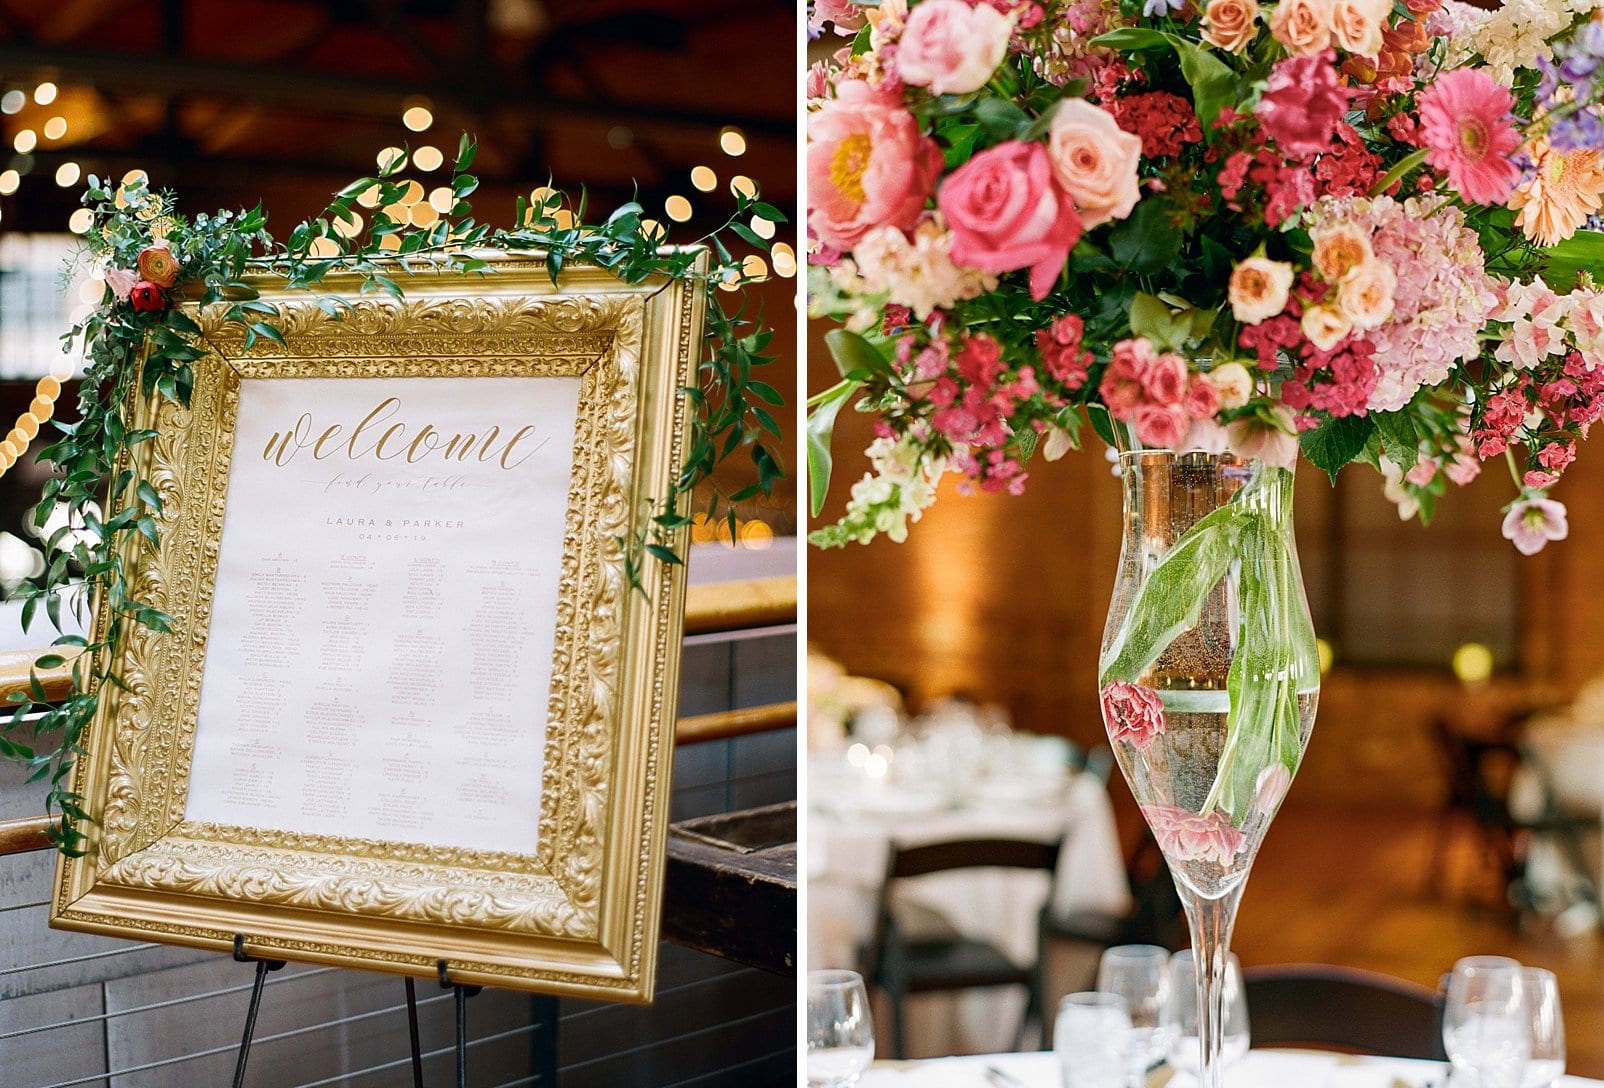 Artfully Arranged a round floral centerpiece. Welcome sign with escort list in a large gold frame photo